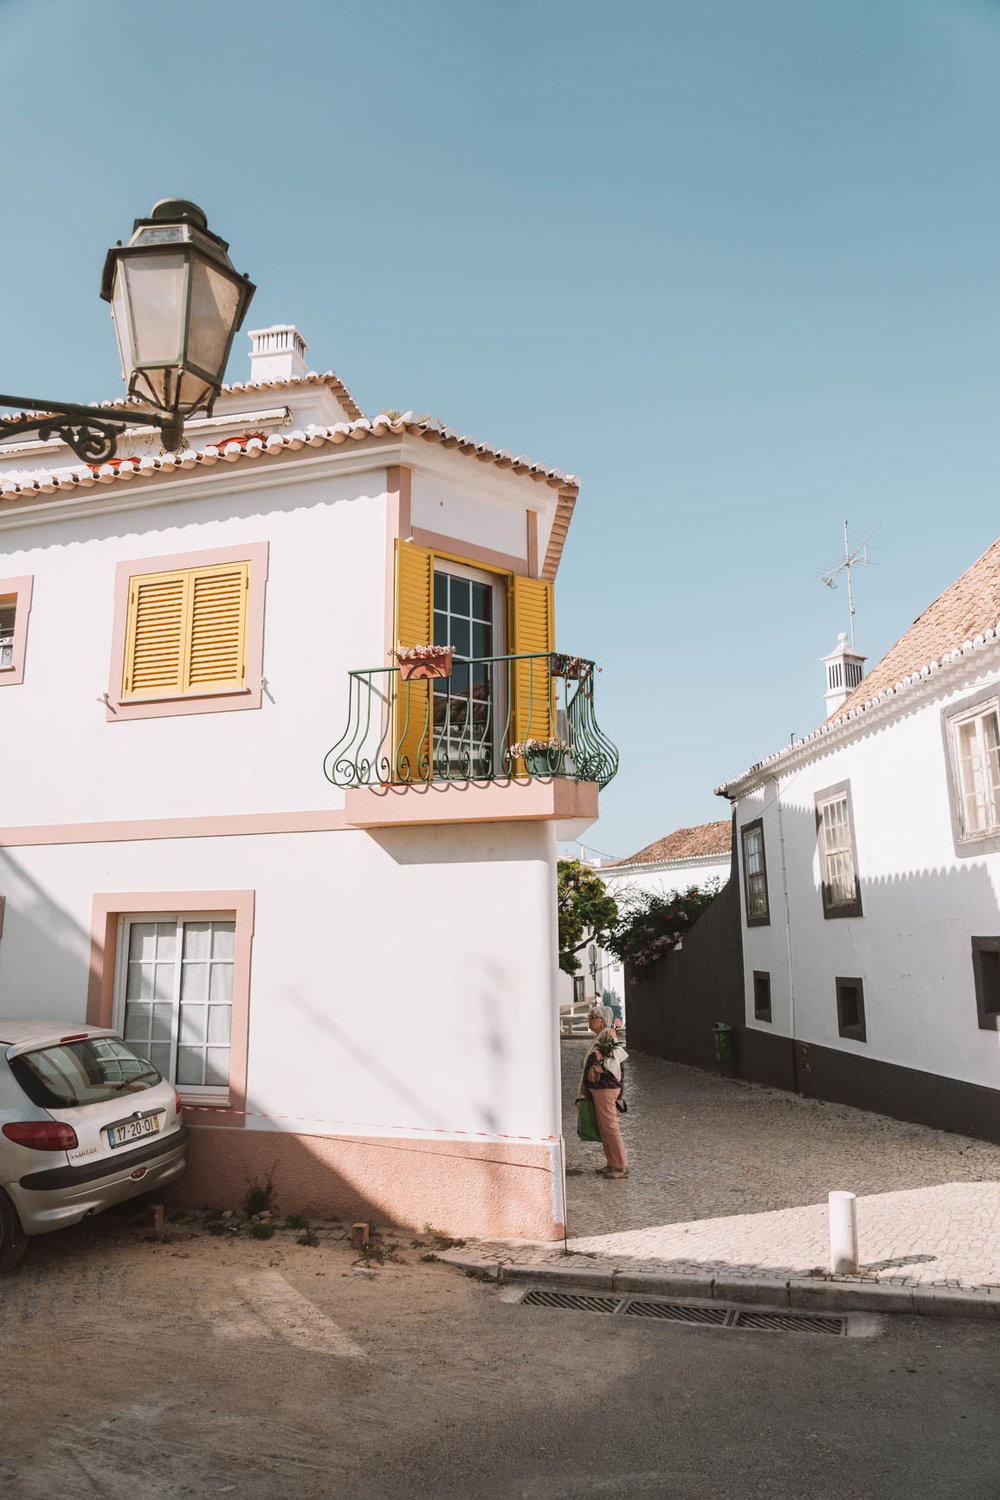 Lagos Old Town - Fun things to do in Lagos Algarve Portugal #Portugal #Europe